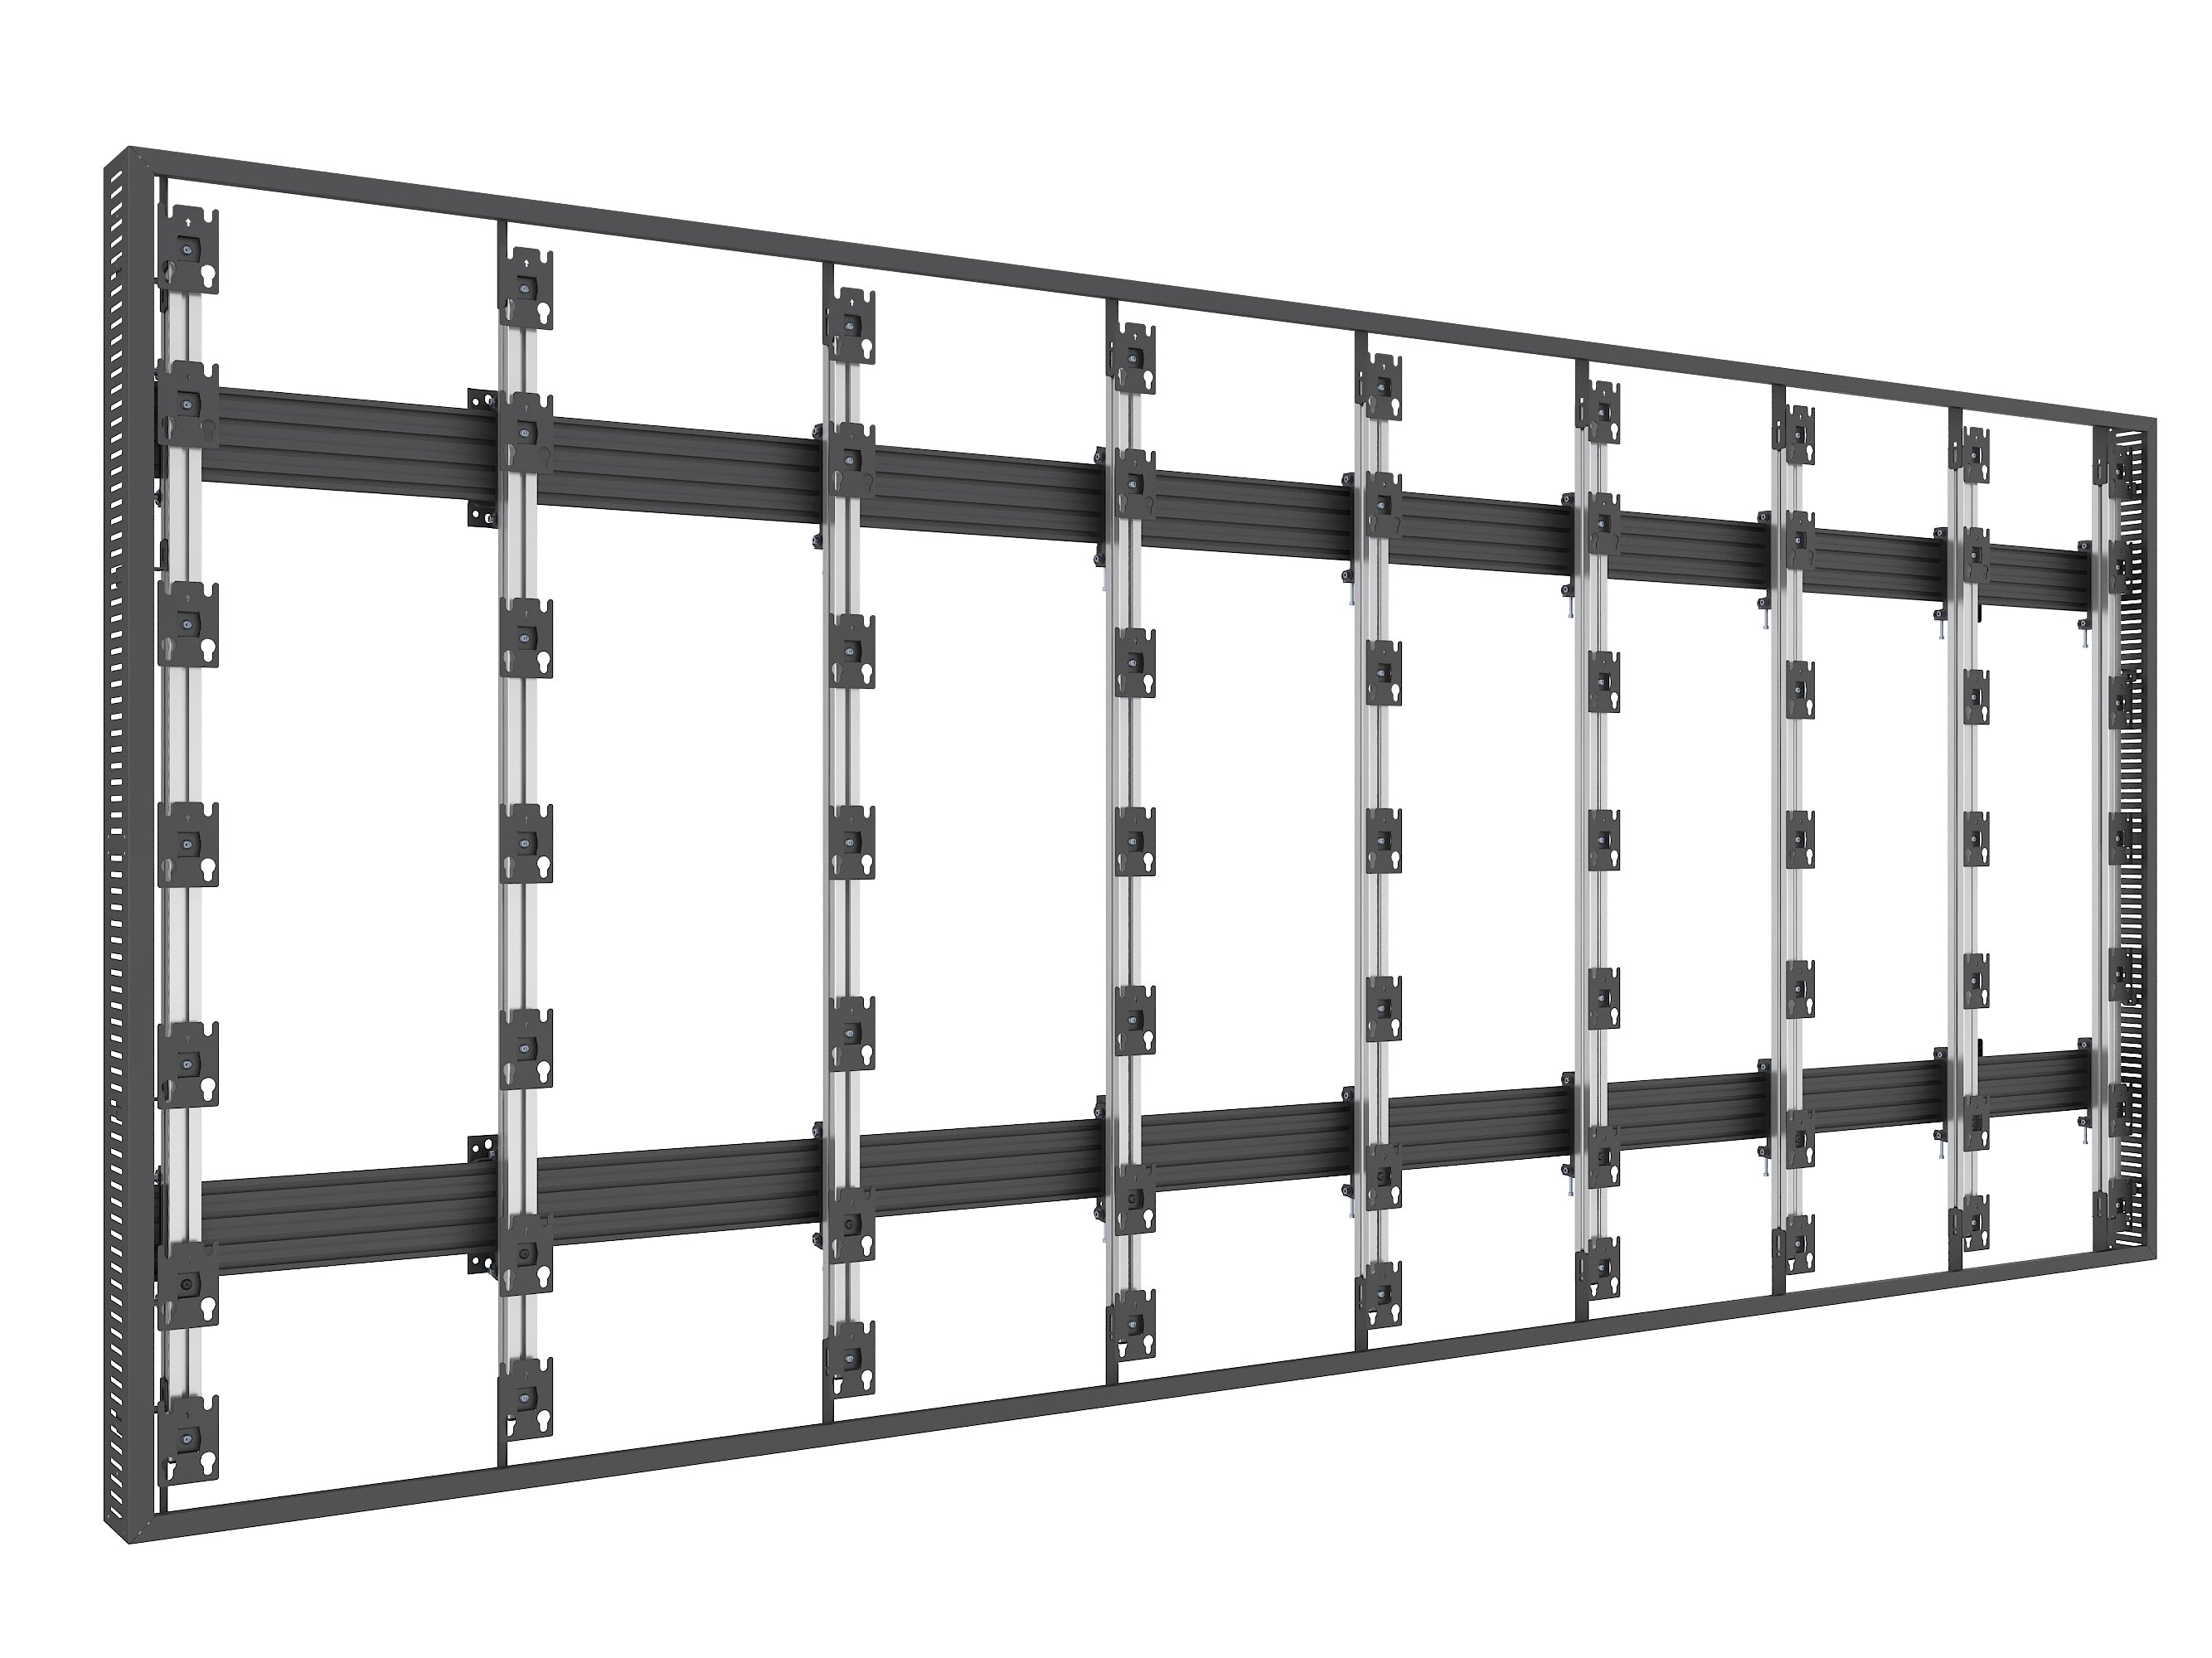 Zaxxis™ Direct-View LED Modular Mount